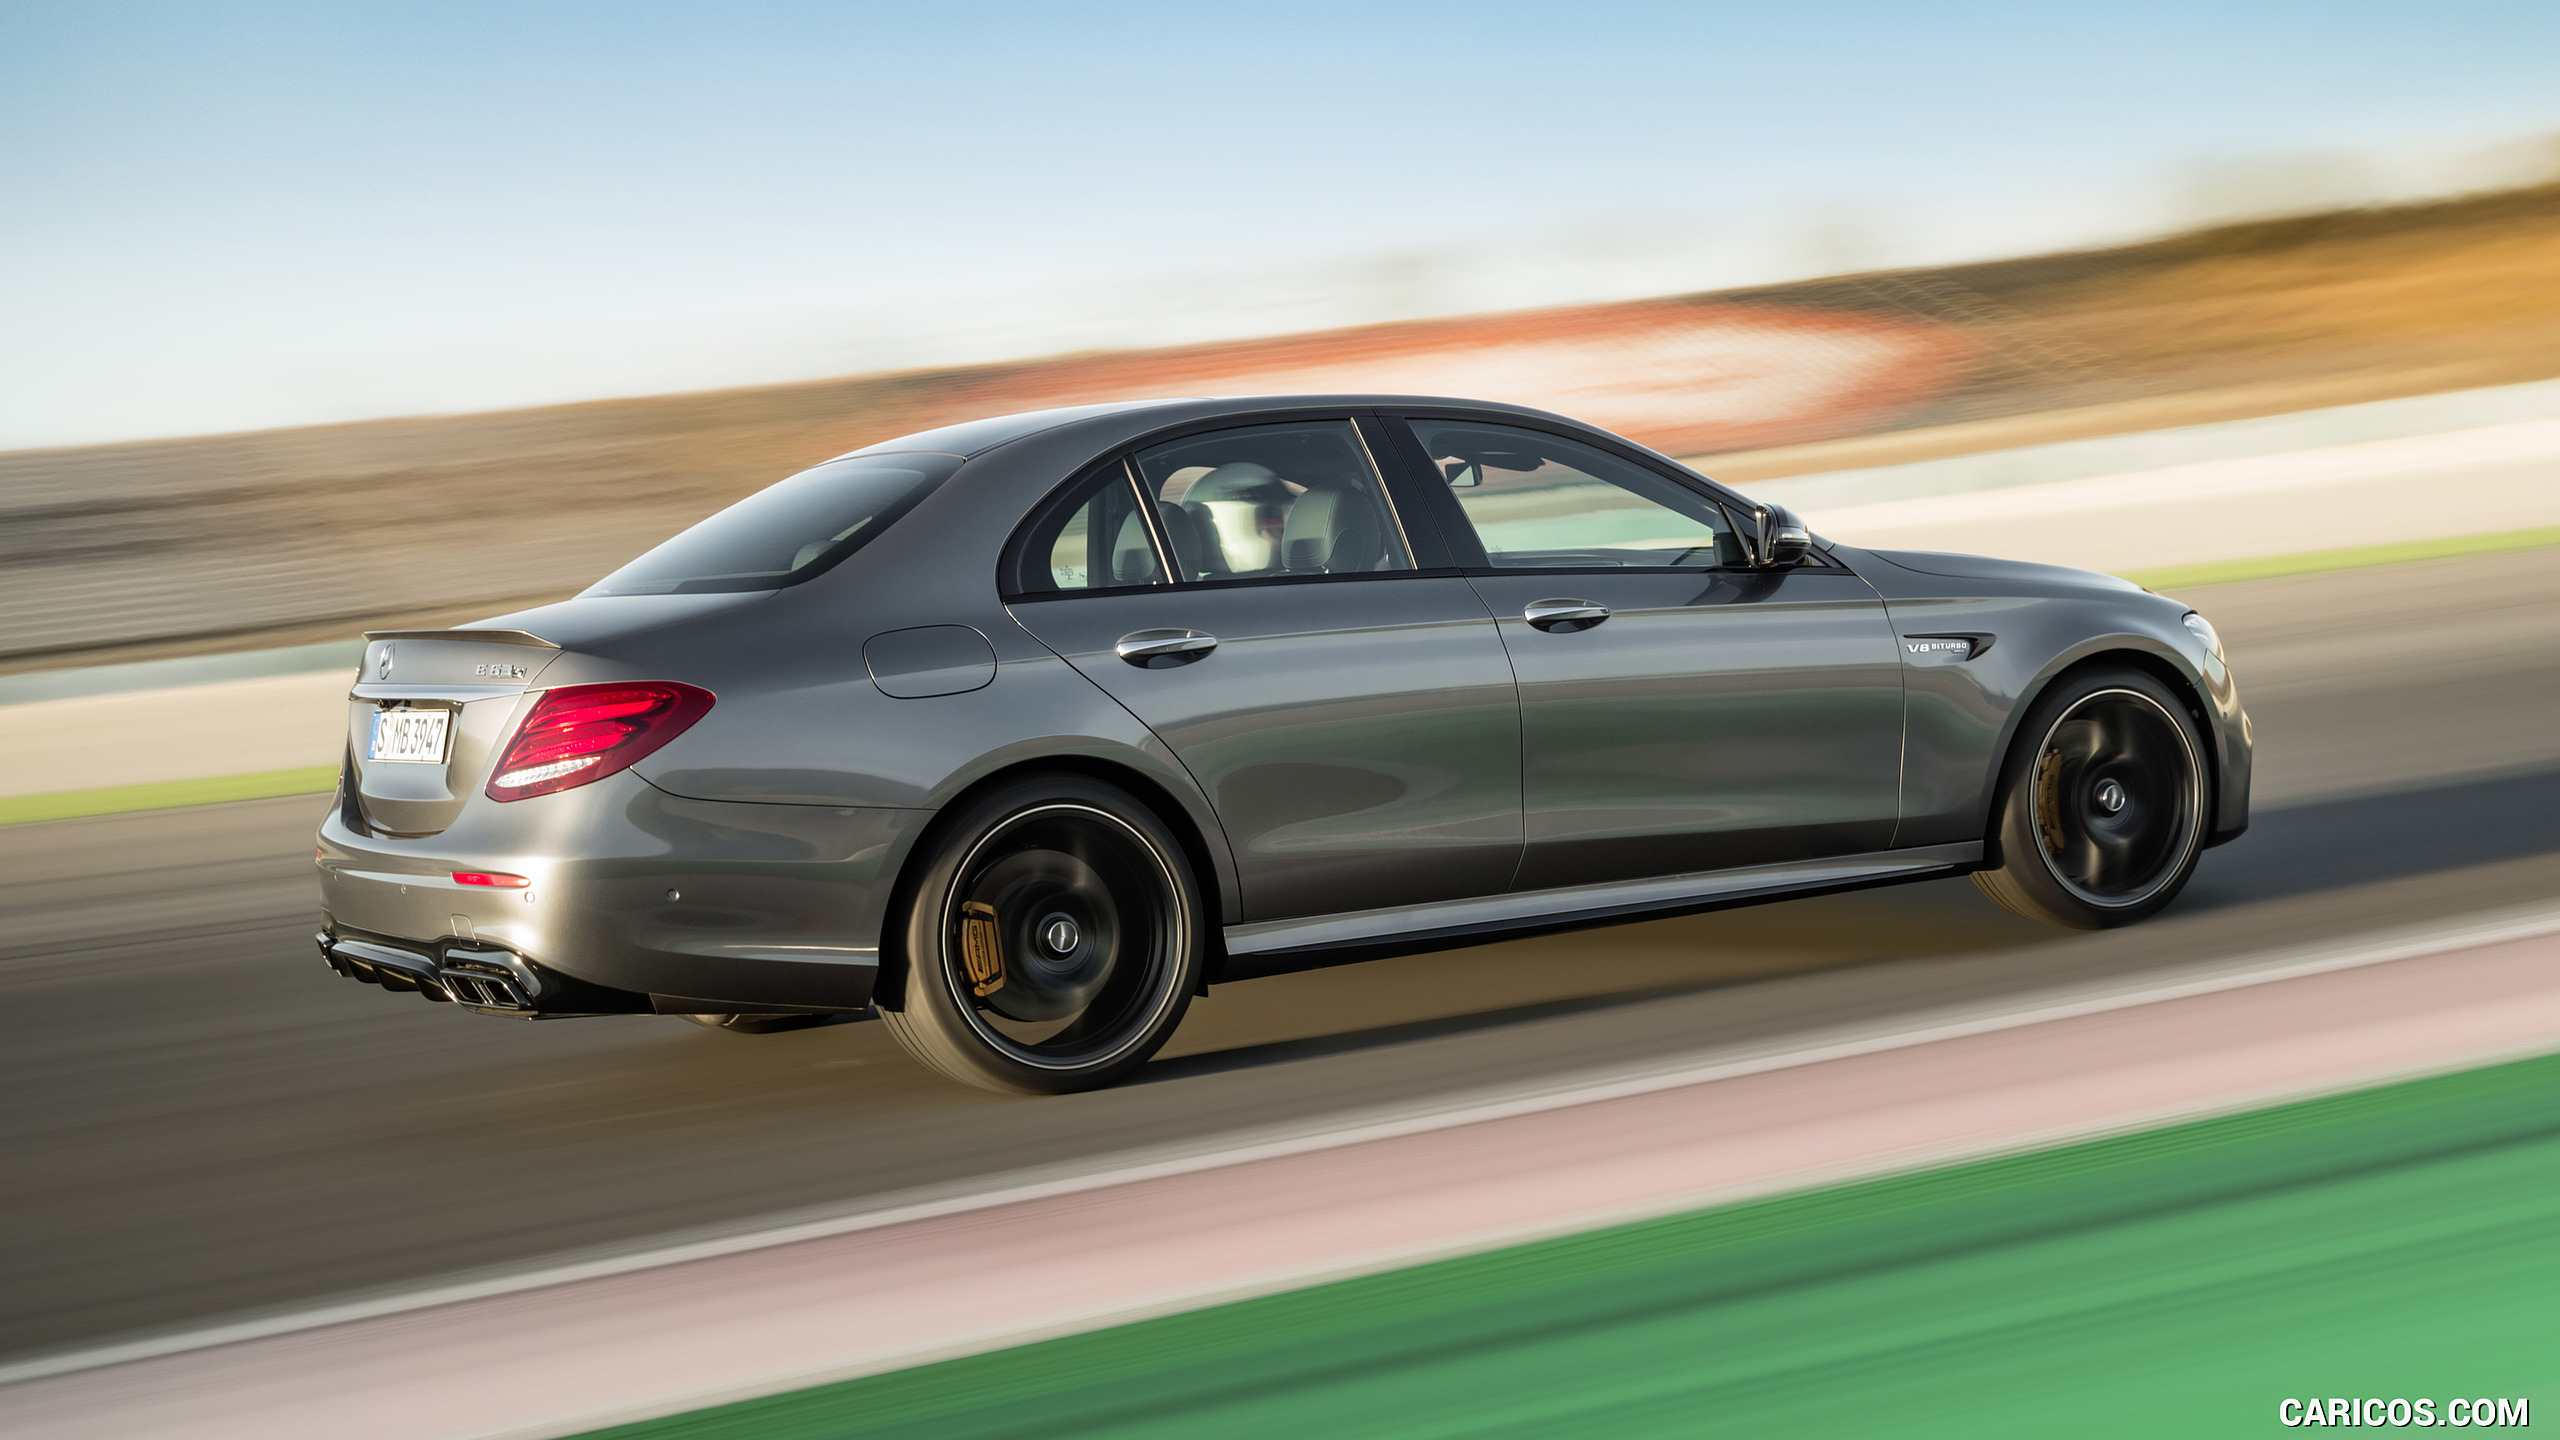 2018 Mercedes-AMG E63 S 4MATIC+ - Side, #16 of 323